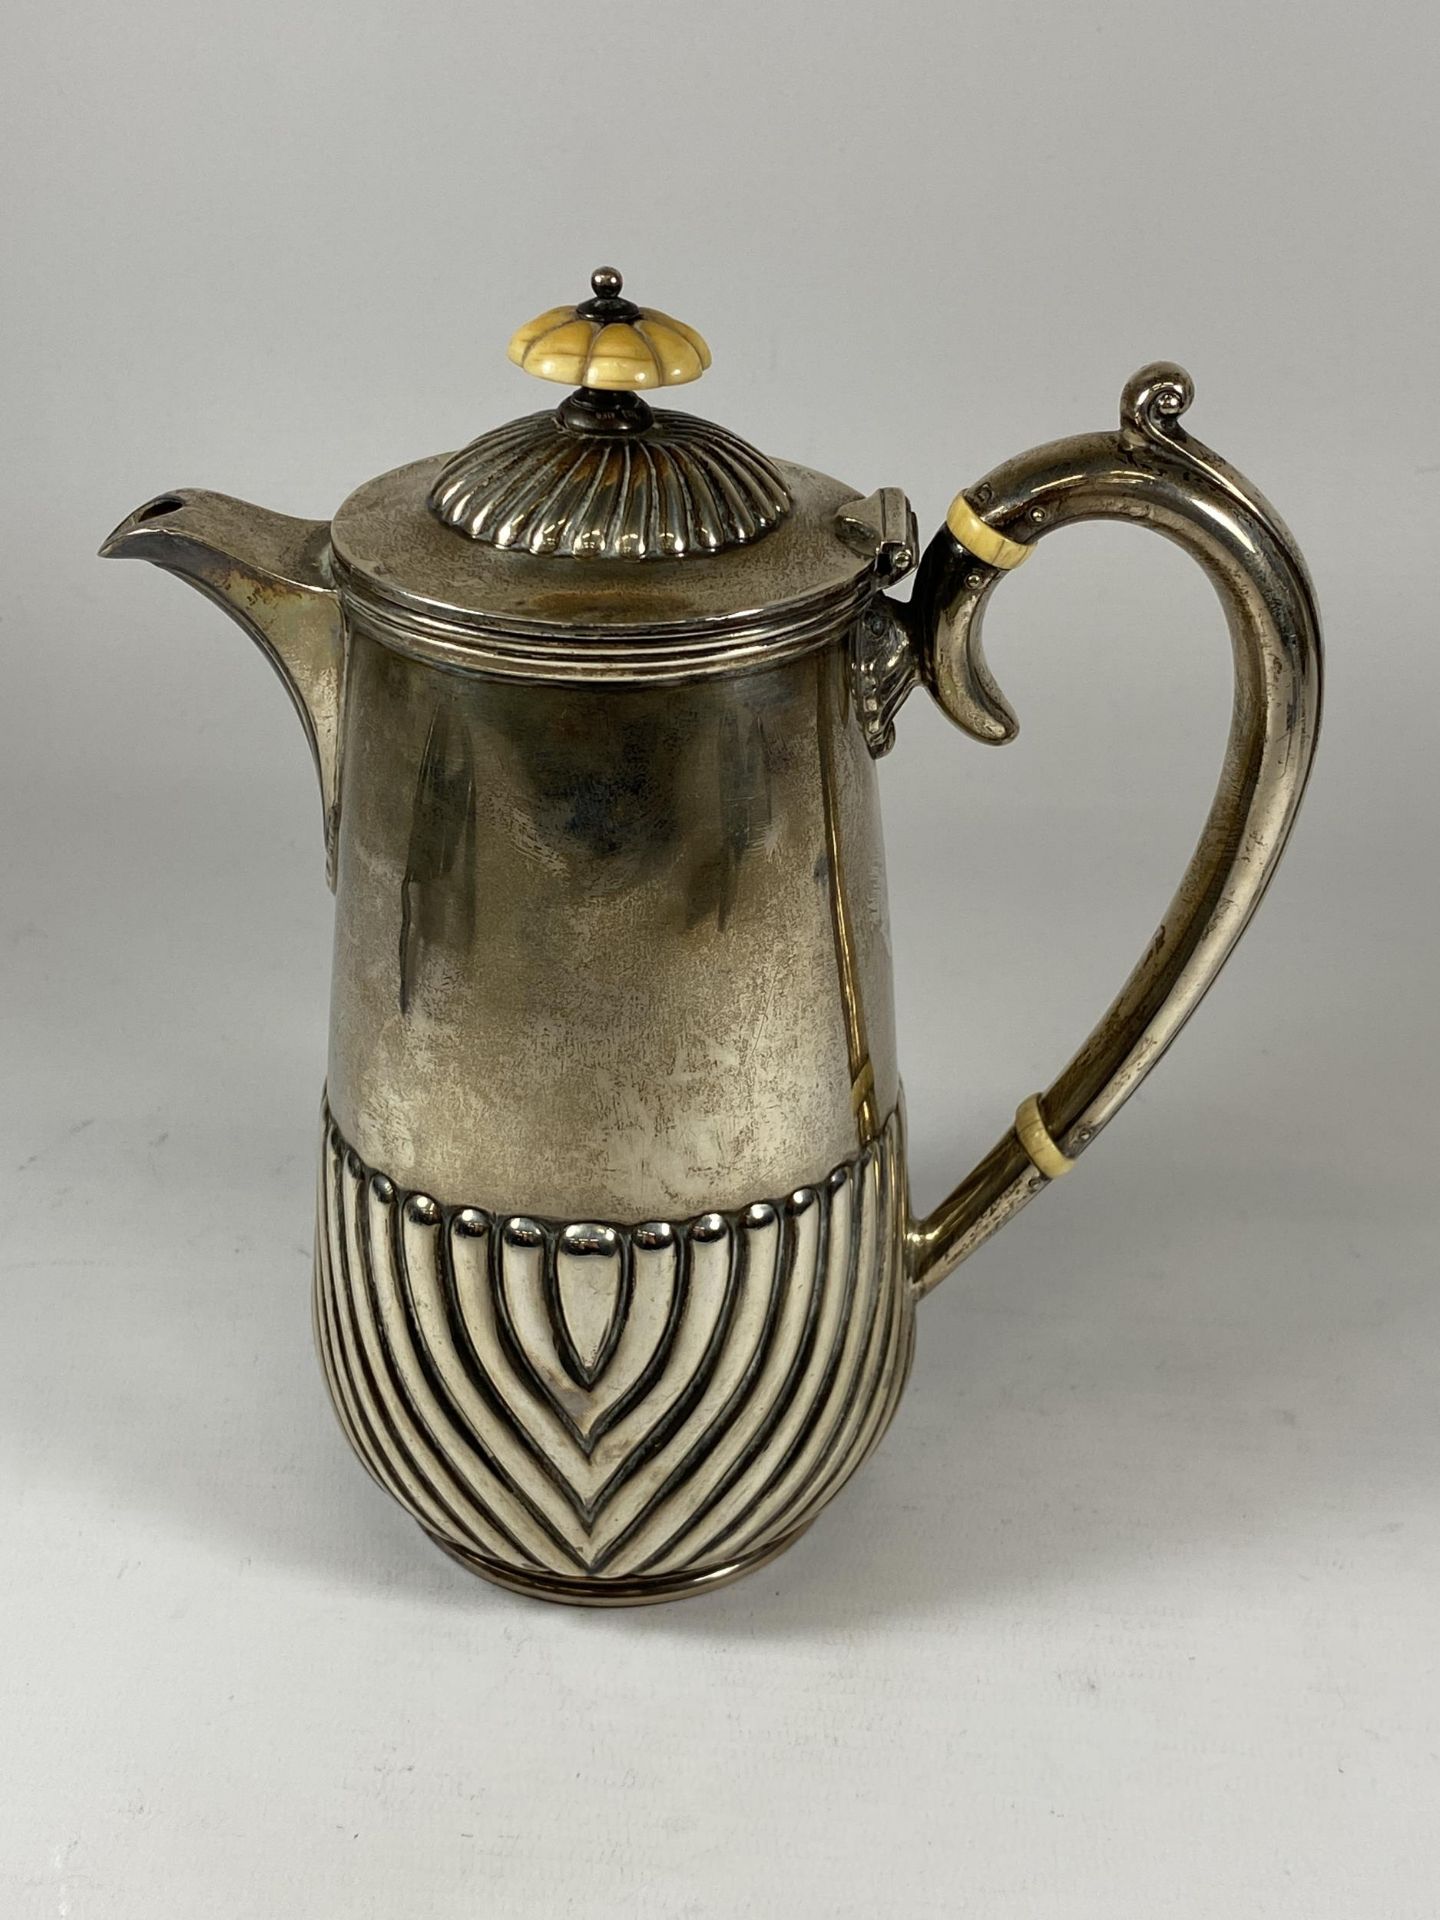 AN EDWARDIAN SILVER FLUTED DESIGN TEAPOT, HALLMARKS FOR SHEFFIELD, 1902, MAKERS JOSEPH ROGERS & - Image 3 of 4